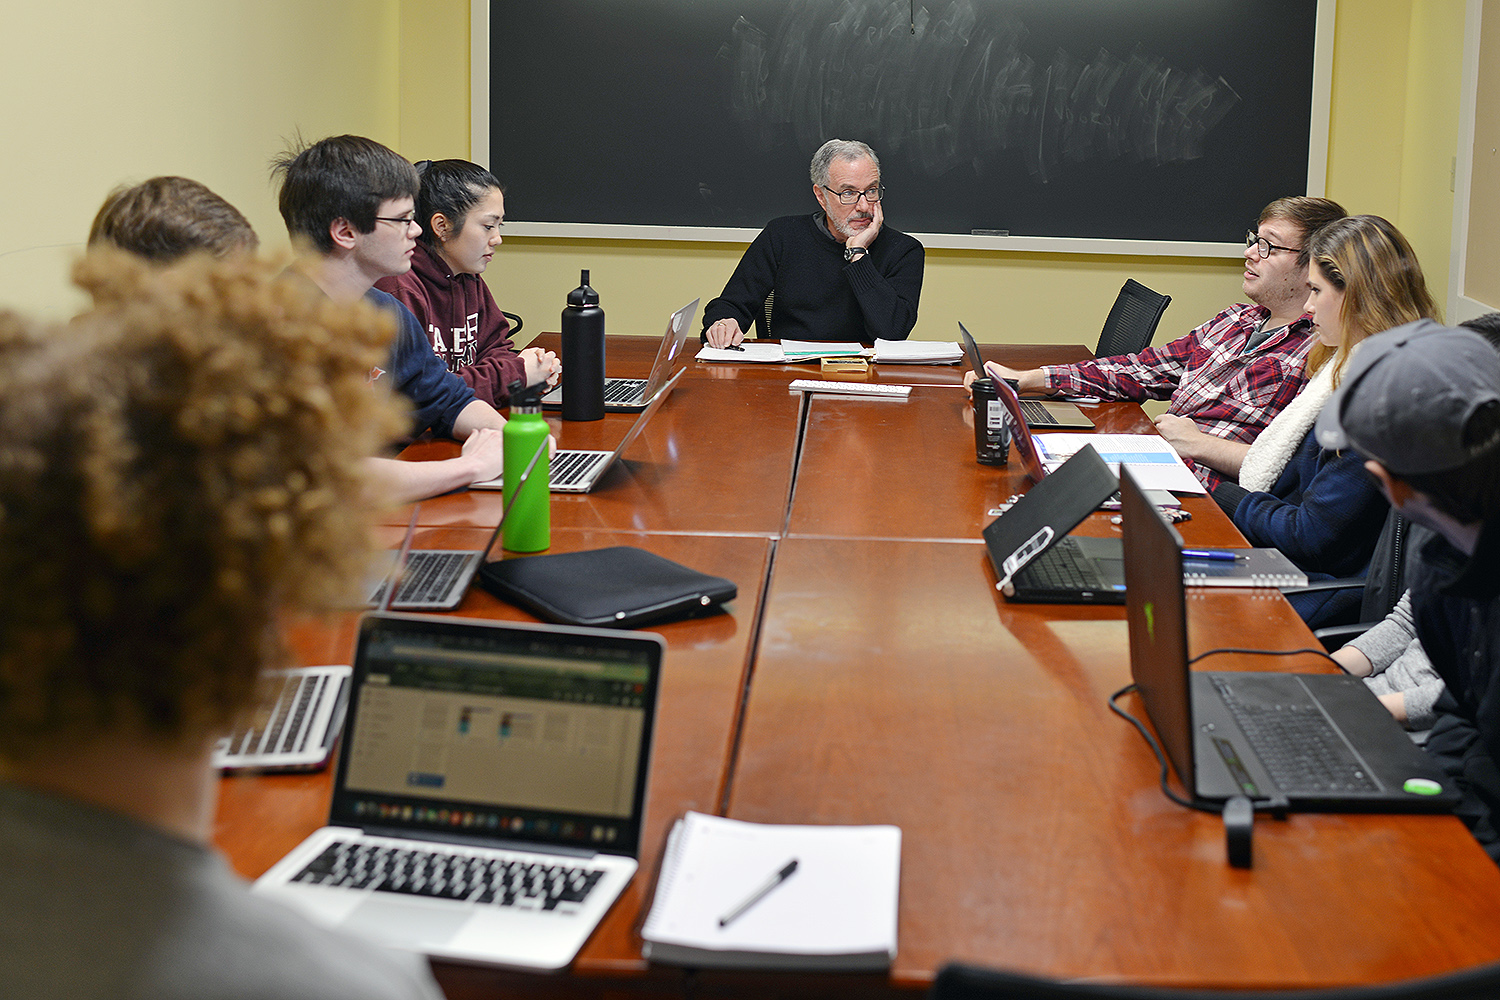 In Andy Szegedy-Maszak’s Calderwood seminar, Classical Studies Today, nine juniors and seniors learn to translate weekly academic readings into writing that can be understood and appreciated by various audiences.